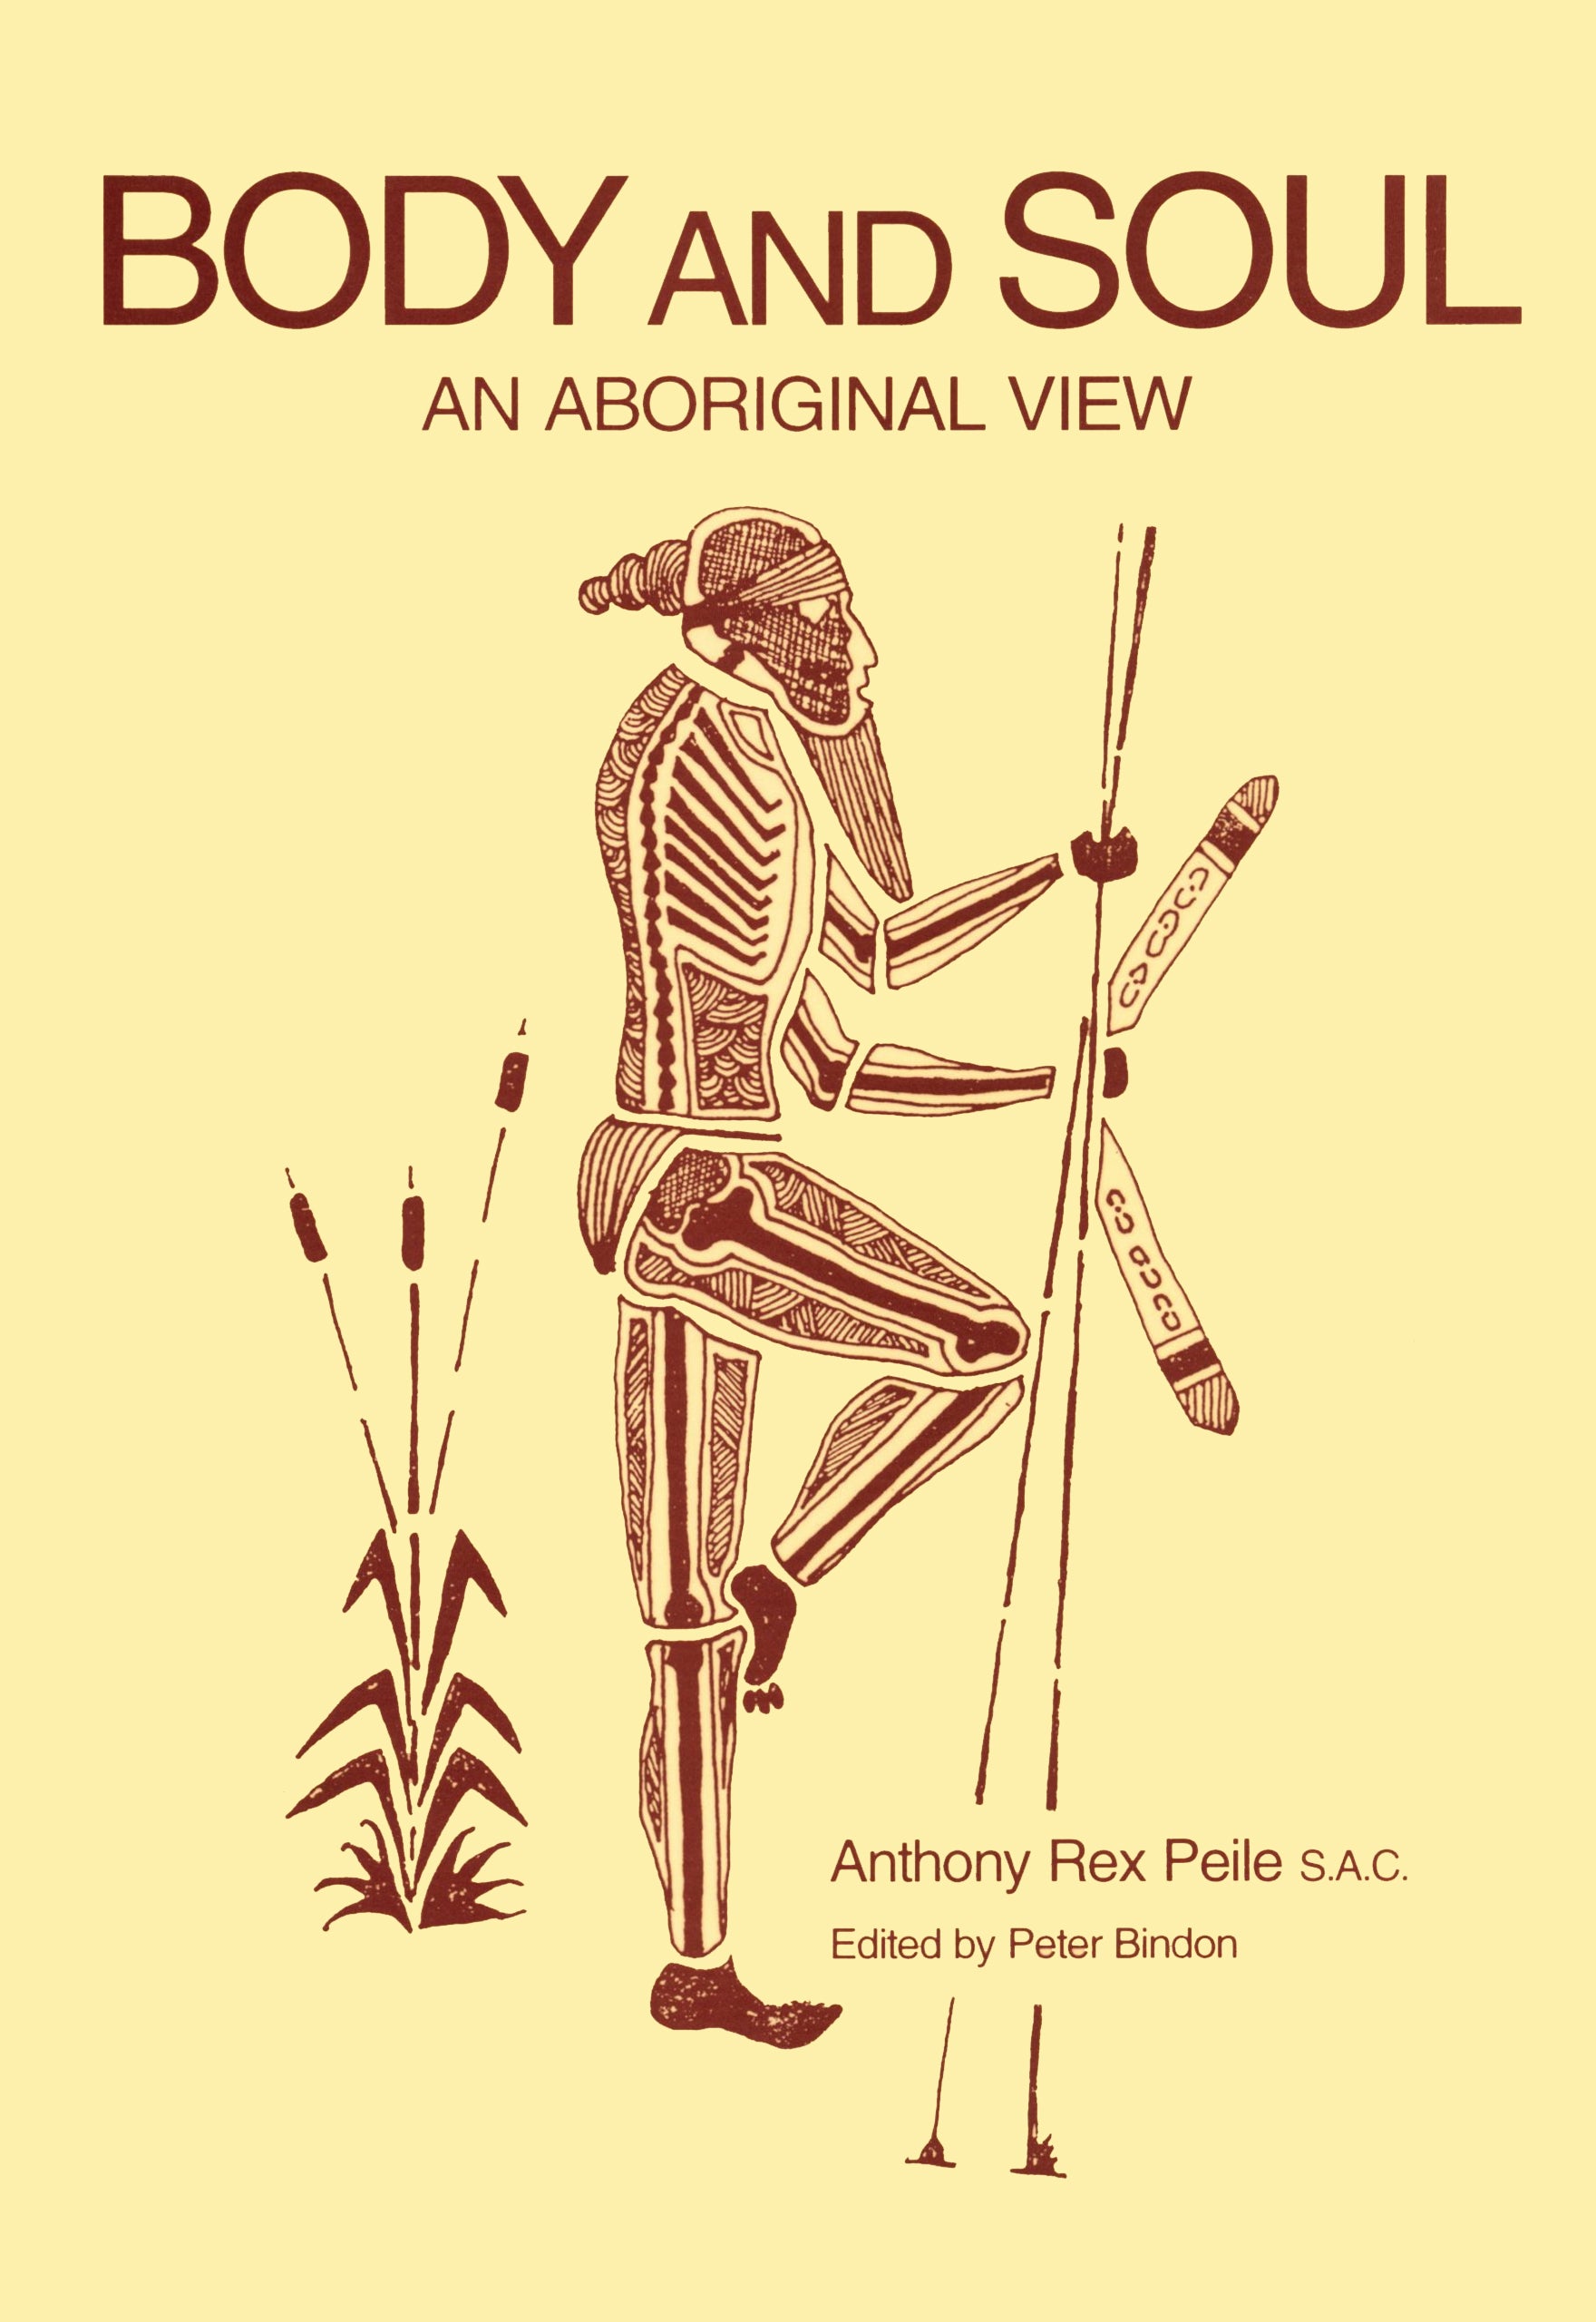 Body and Soul: An Aboriginal View by A. R. Peile